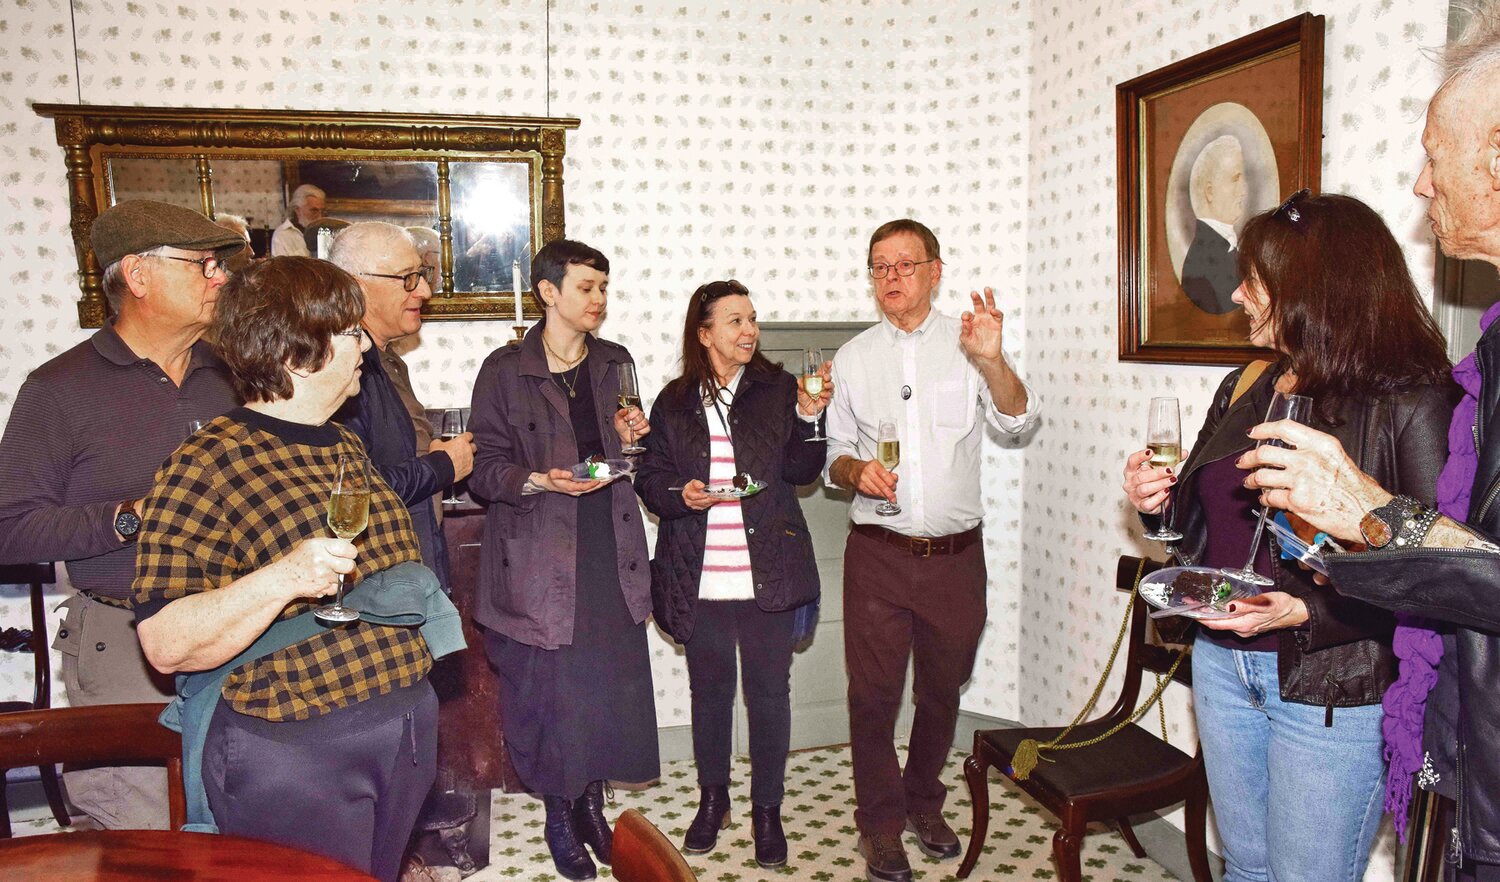 Historian Roy Ziegler explains the history of the Parry Mansion and the portrait of Benjamin Parry.